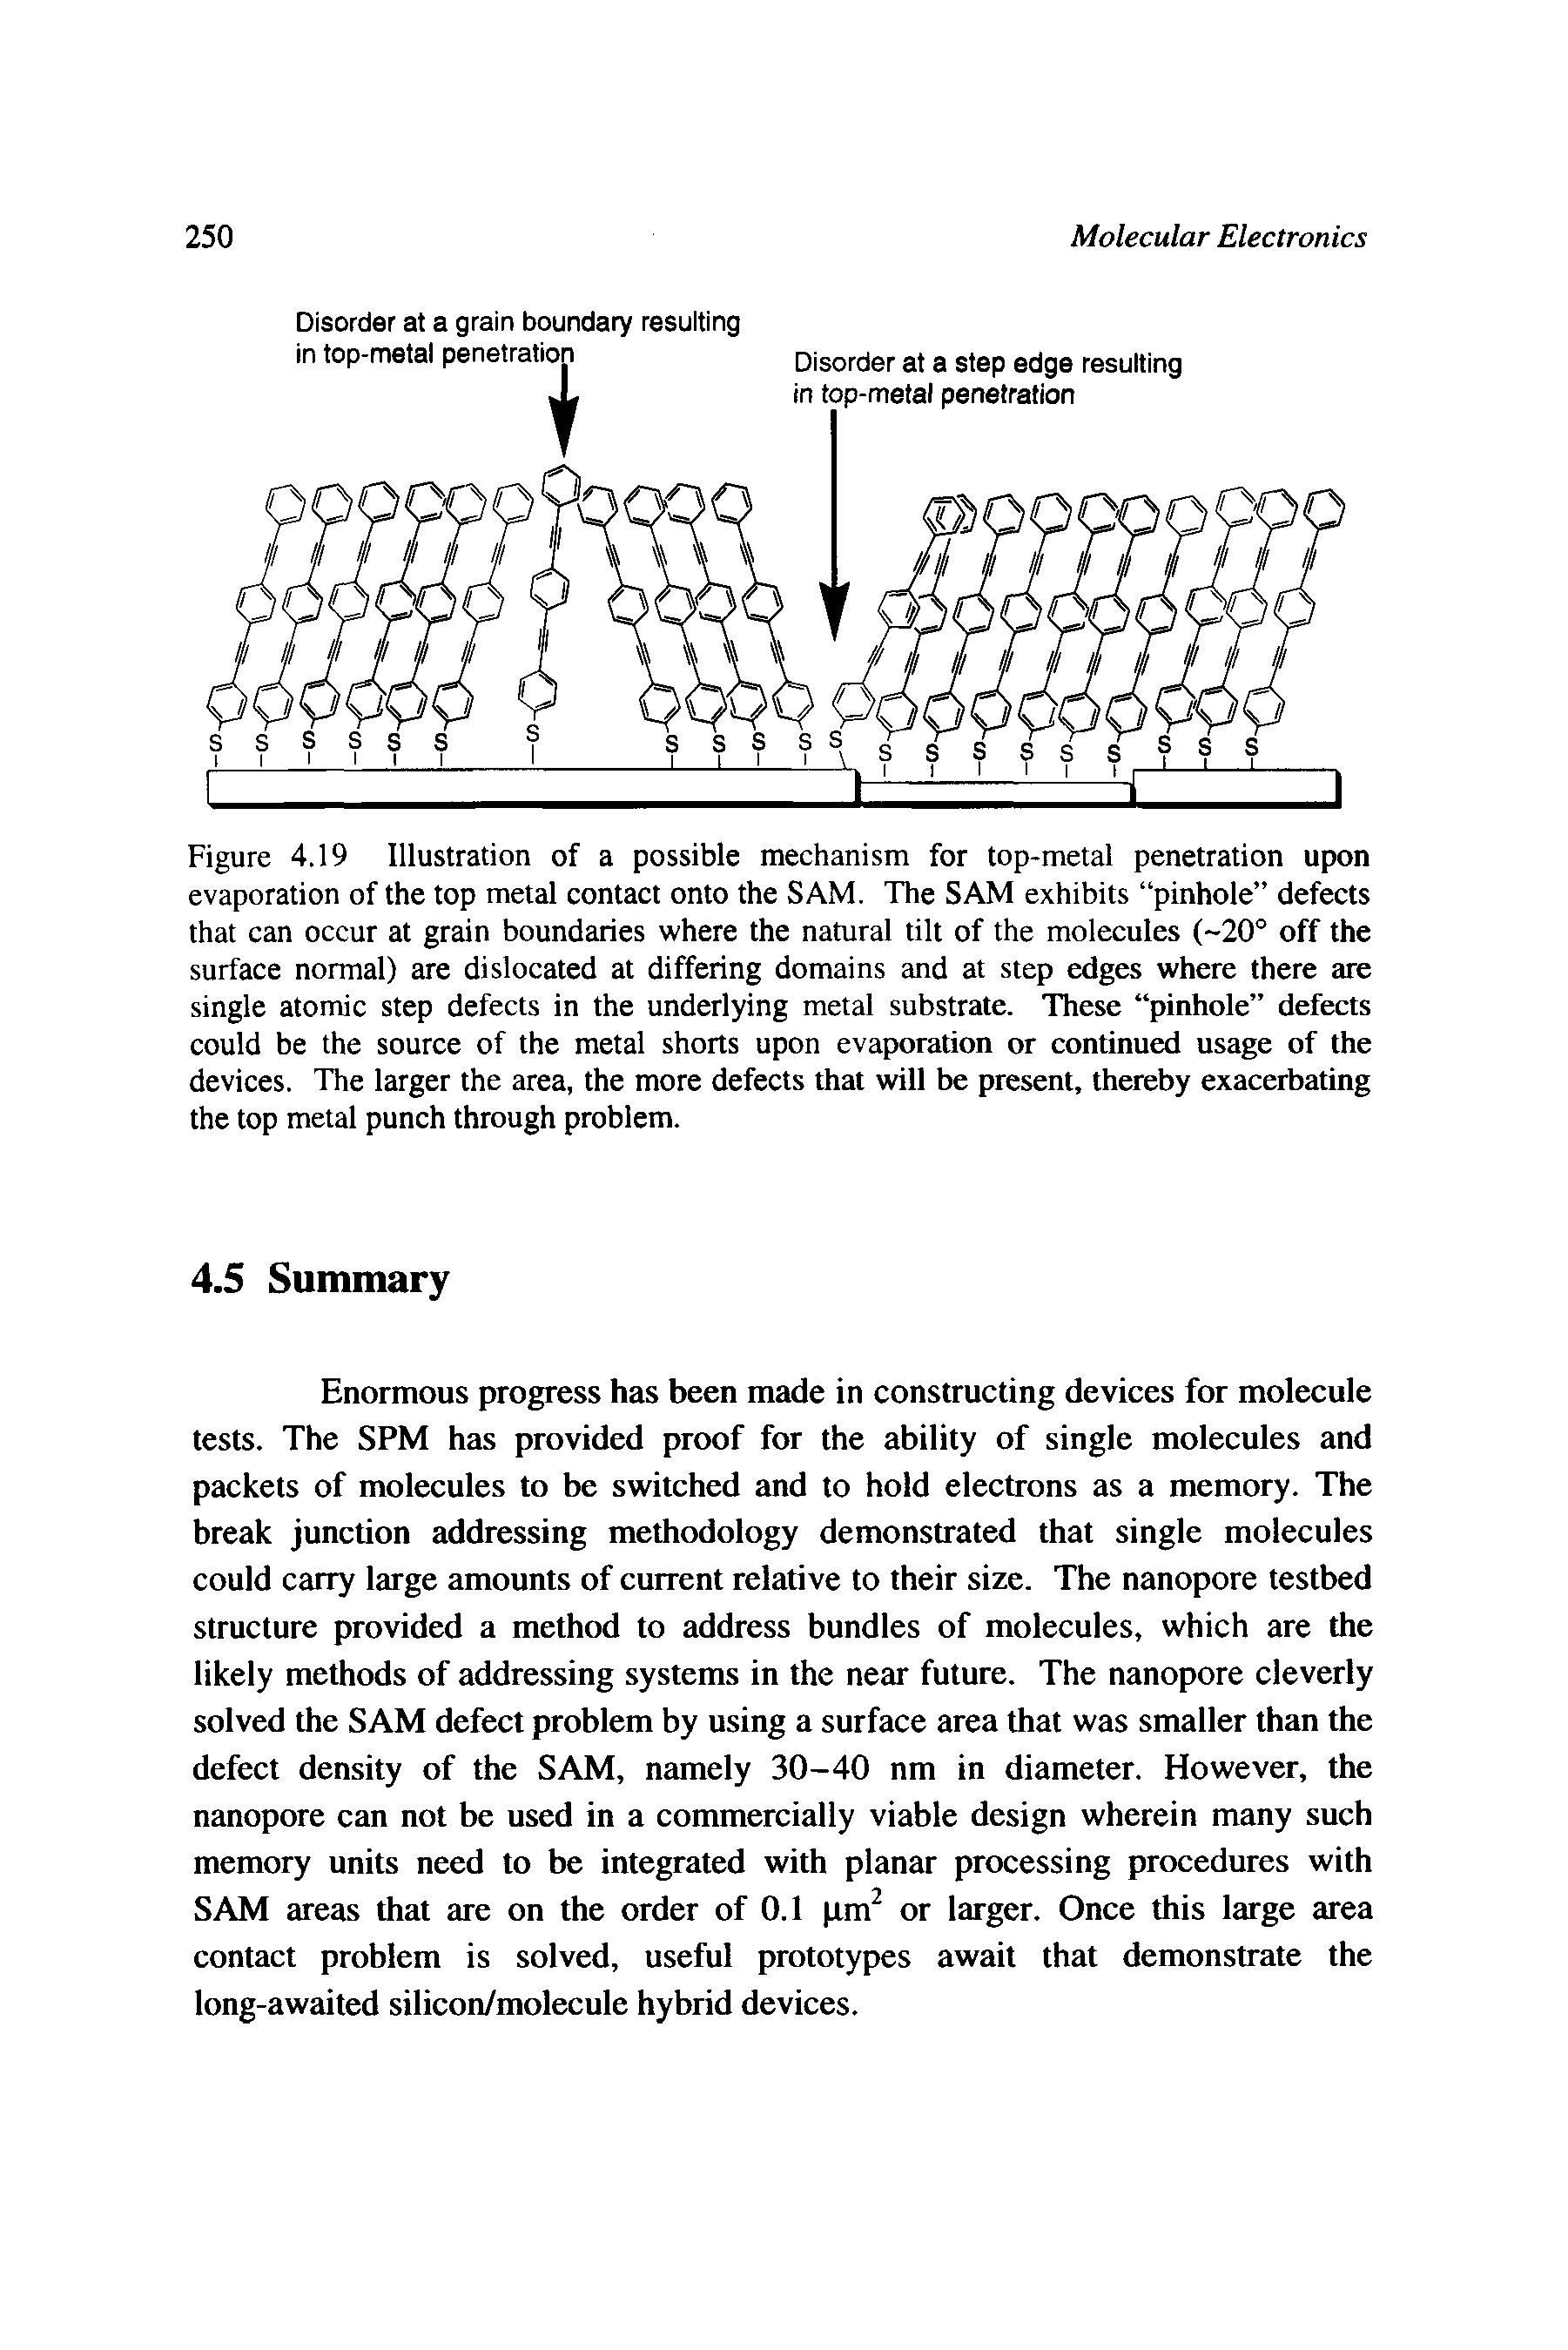 Figure 4.19 Illustration of a possible mechanism for top-metal penetration upon evaporation of the top metal contact onto the SAM. The SAM exhibits pinhole defects that can occur at grain boundaries where the natural tilt of the molecules (-20° off the surface normal) are dislocated at differing domains and at step edges where there are single atomic step defects in the underlying metal substrate. These pinhole defects could be the source of the metal shorts upon evaporation or continued usage of the devices. The larger the area, the more defects that will be present, thereby exacerbating the top metal punch through problem.